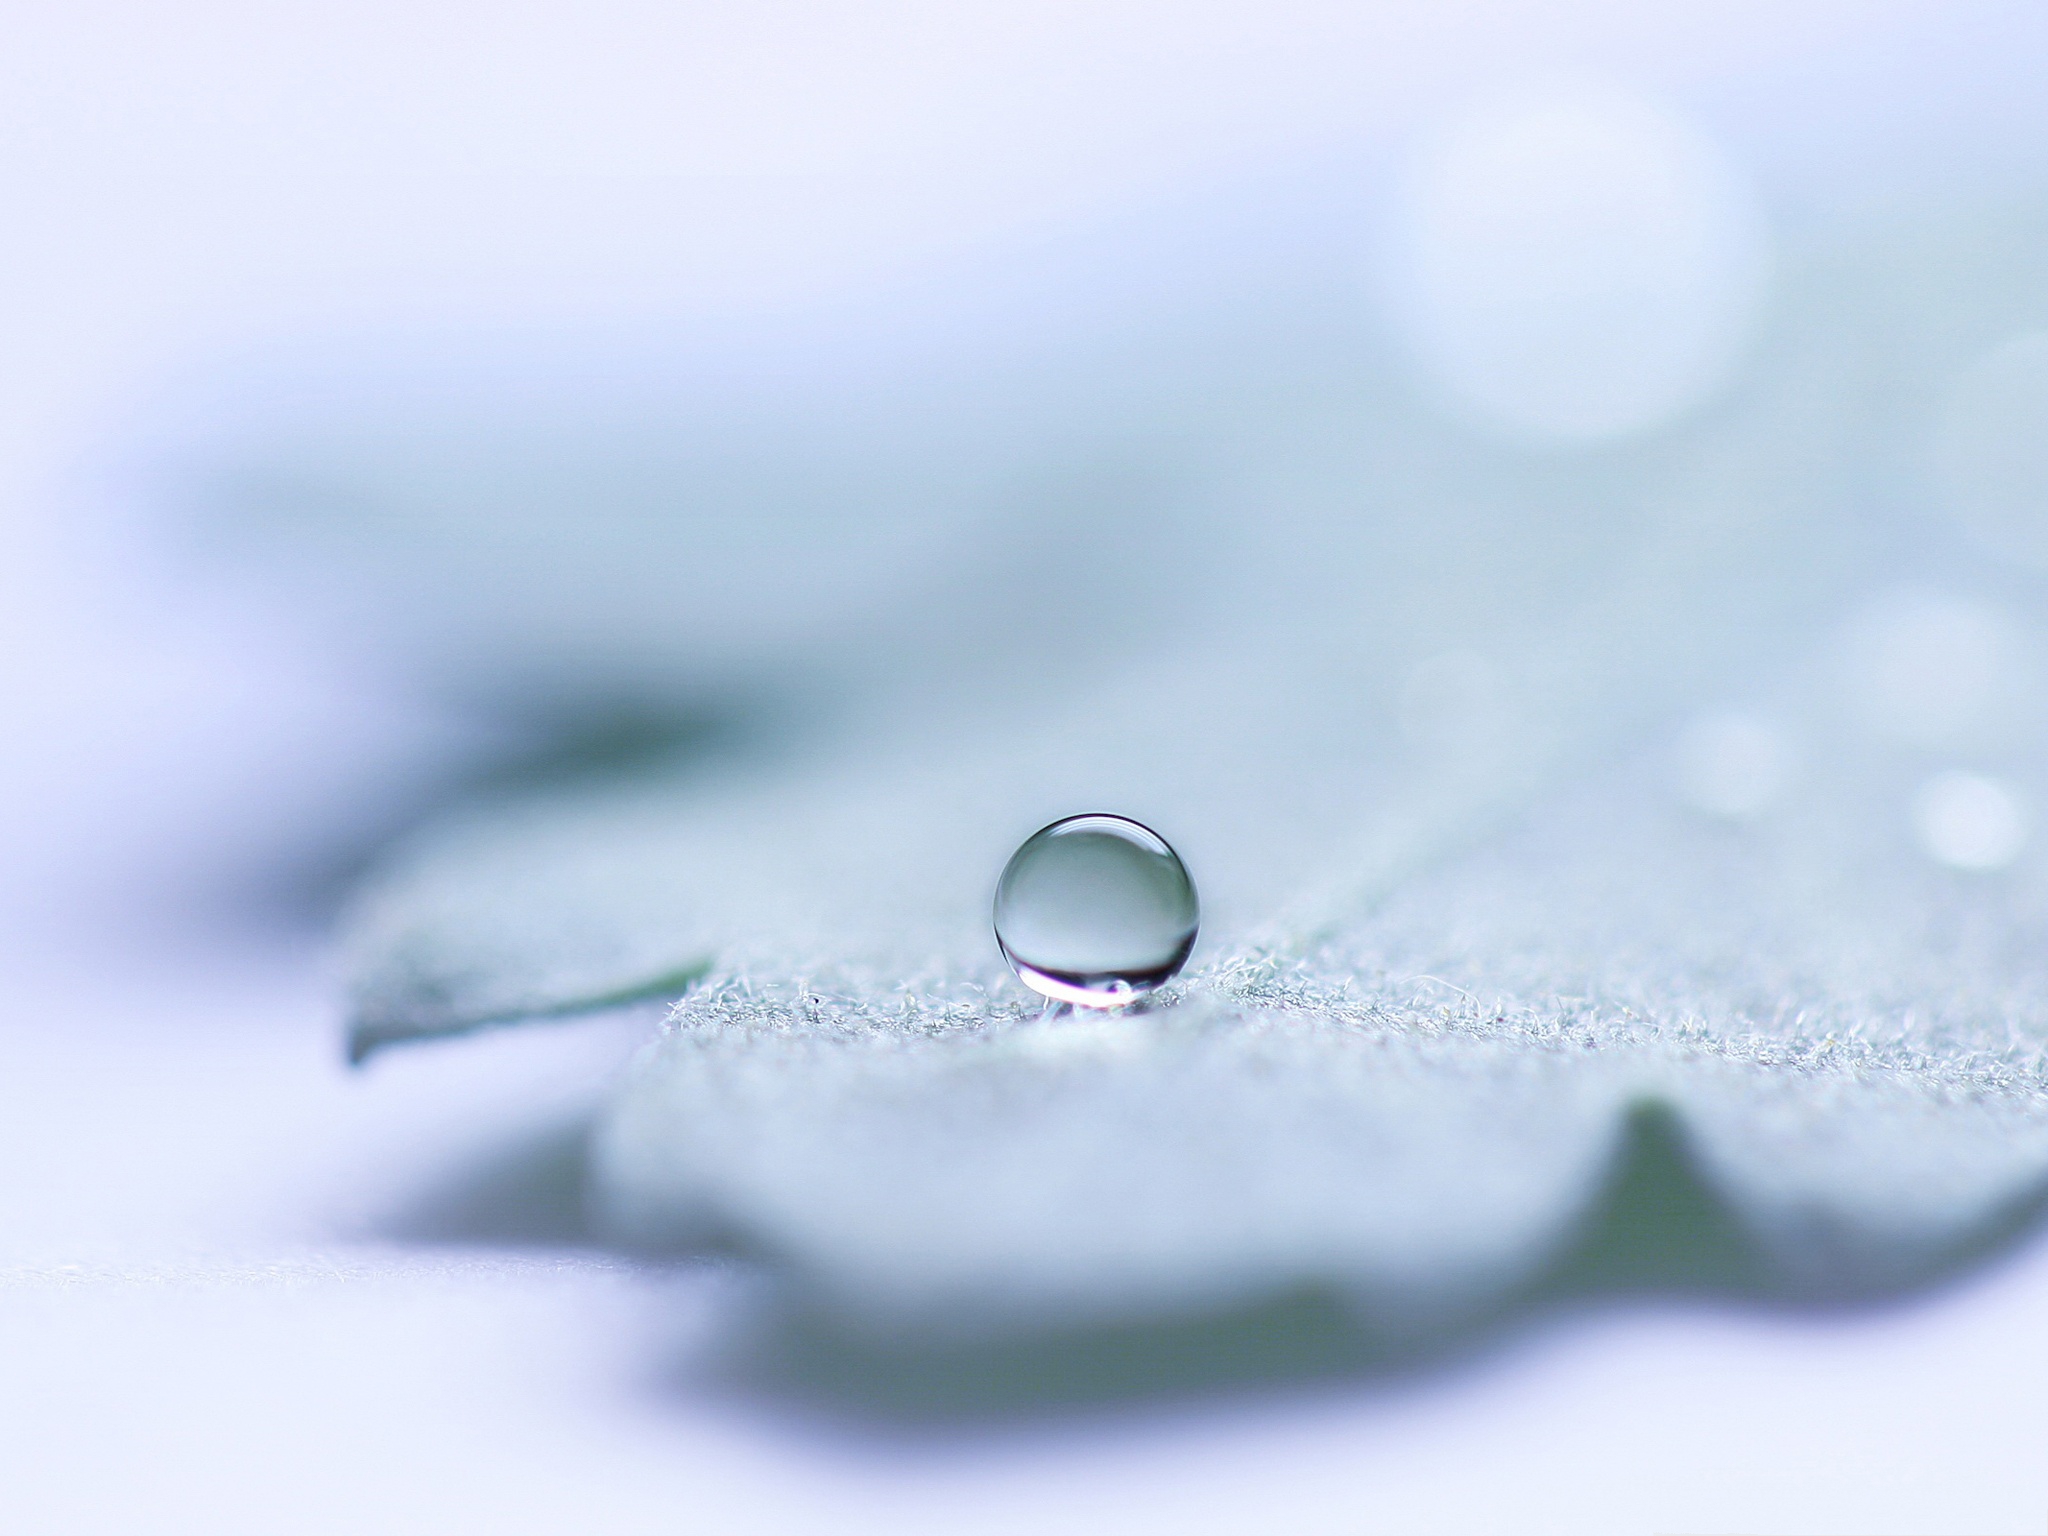 Wallpaper Background Rounded And Crystal Clear Waterdrop